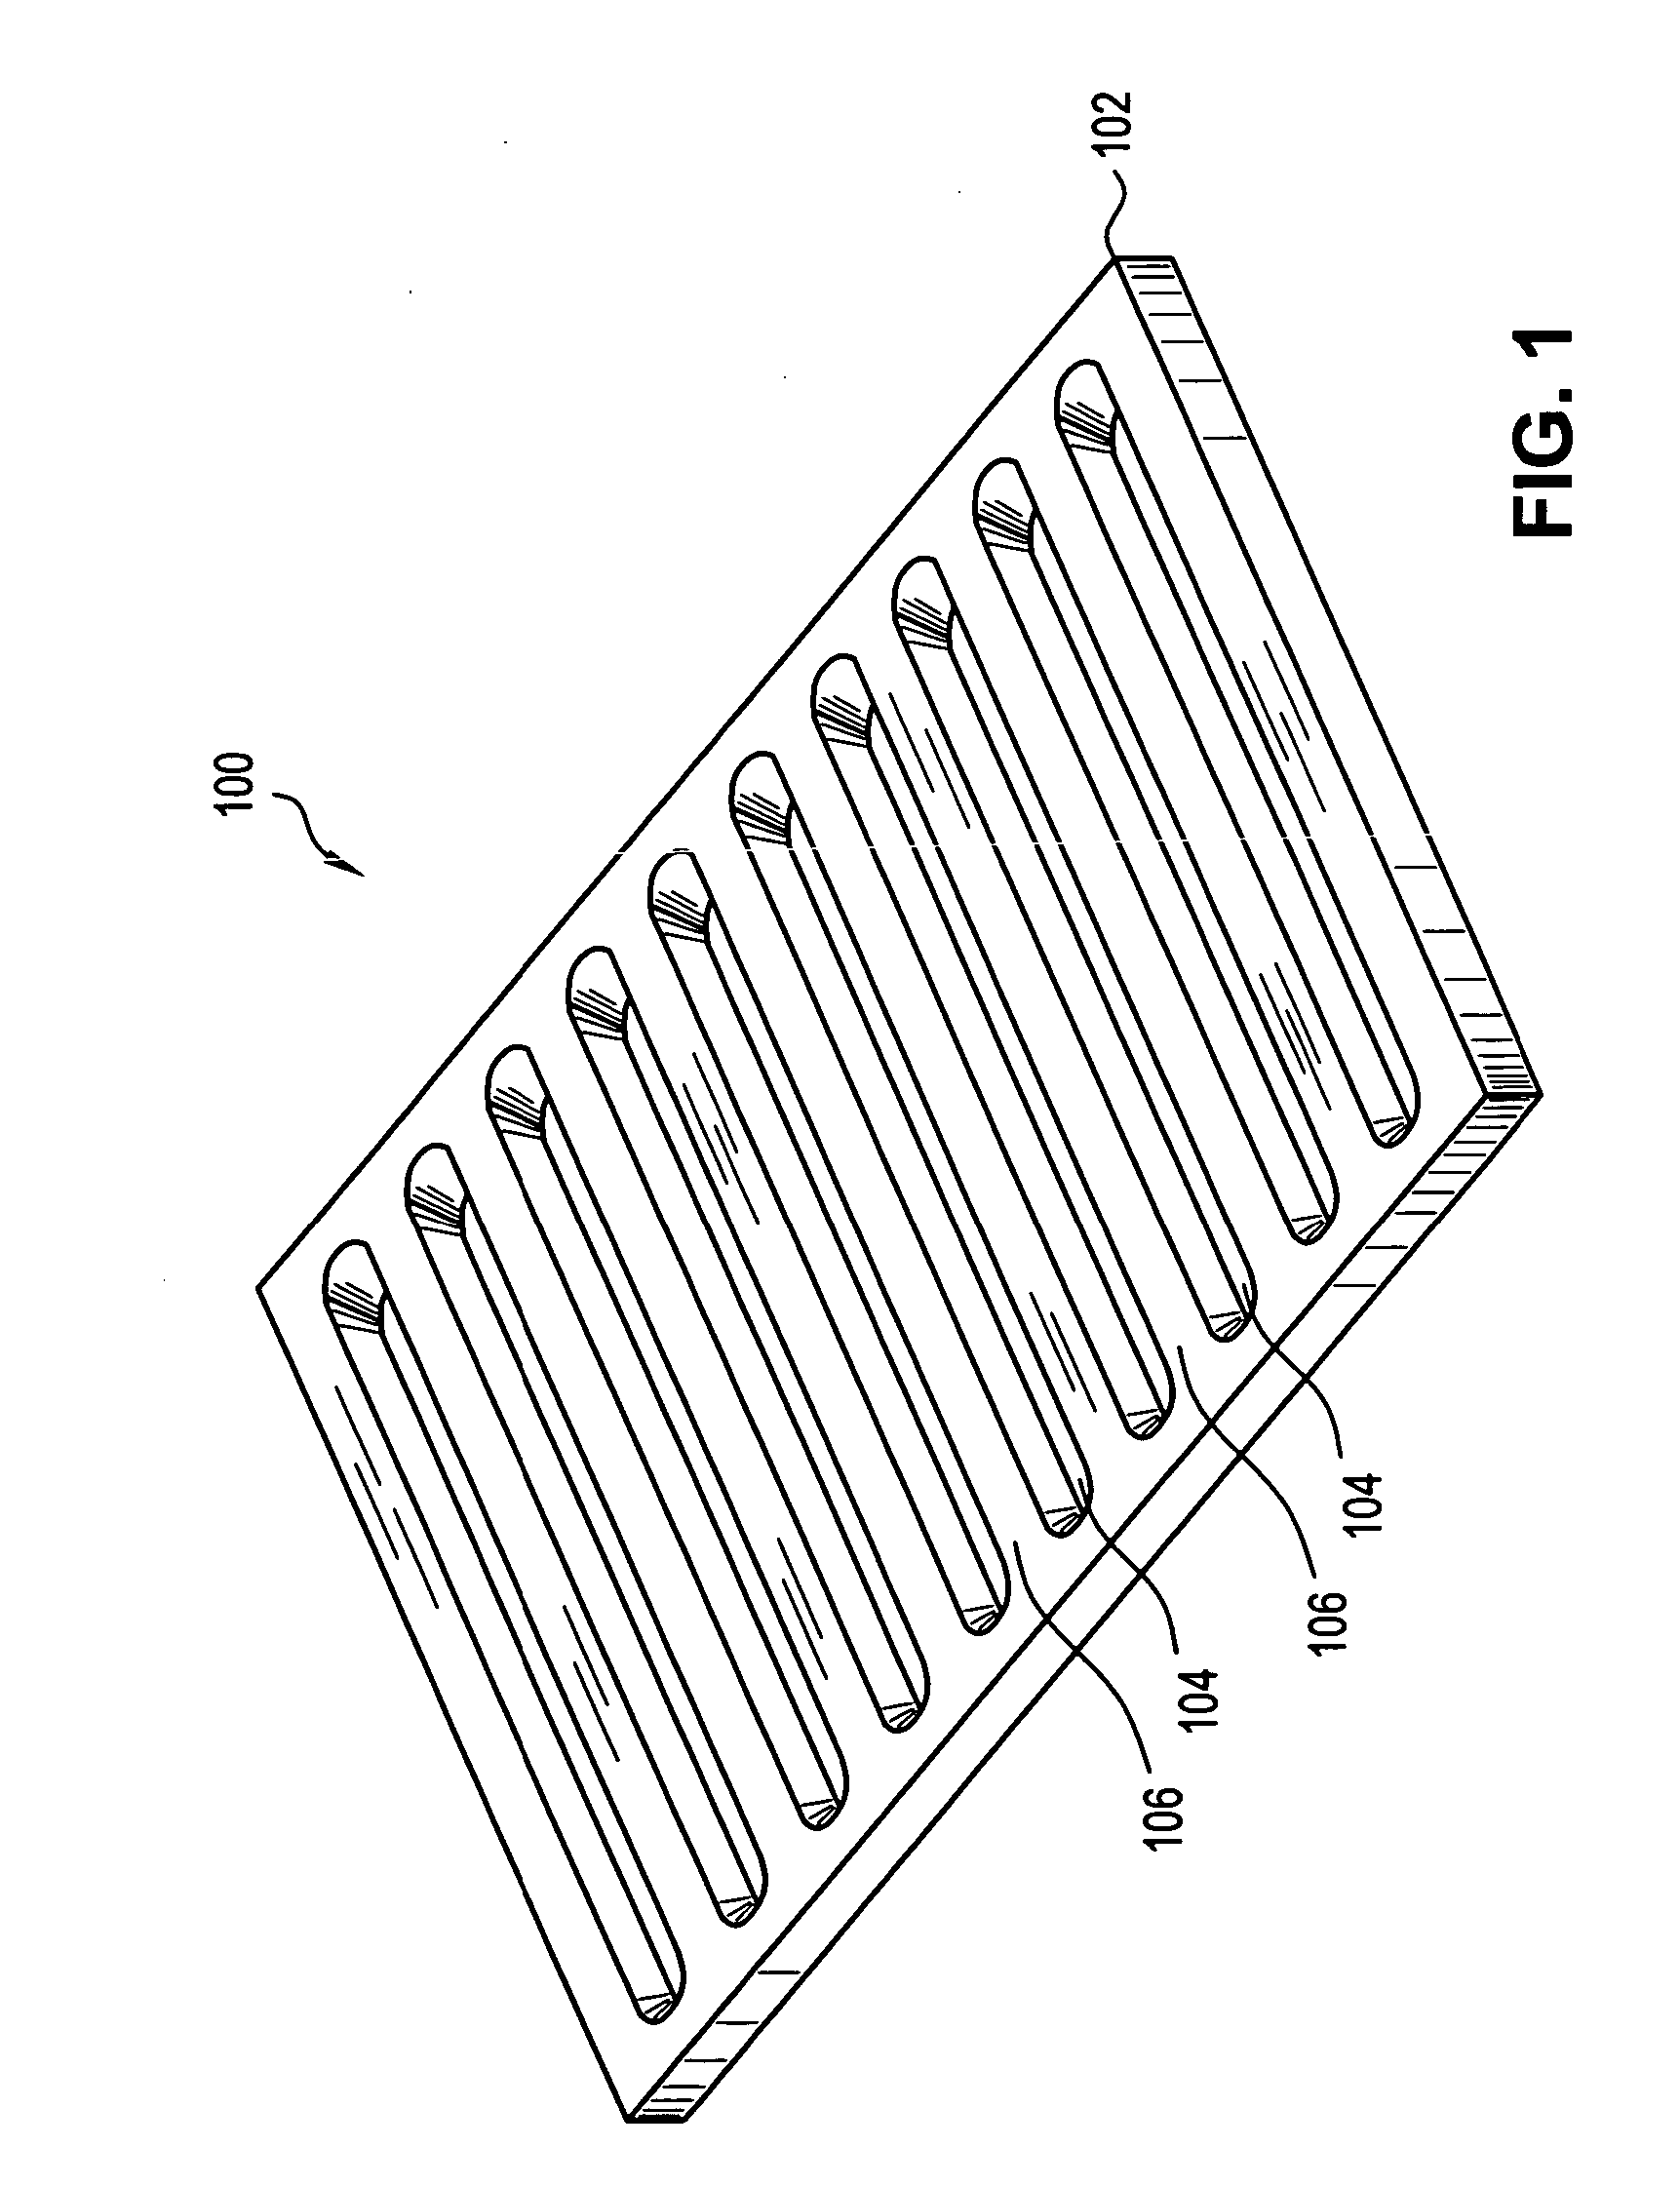 Wound contact device